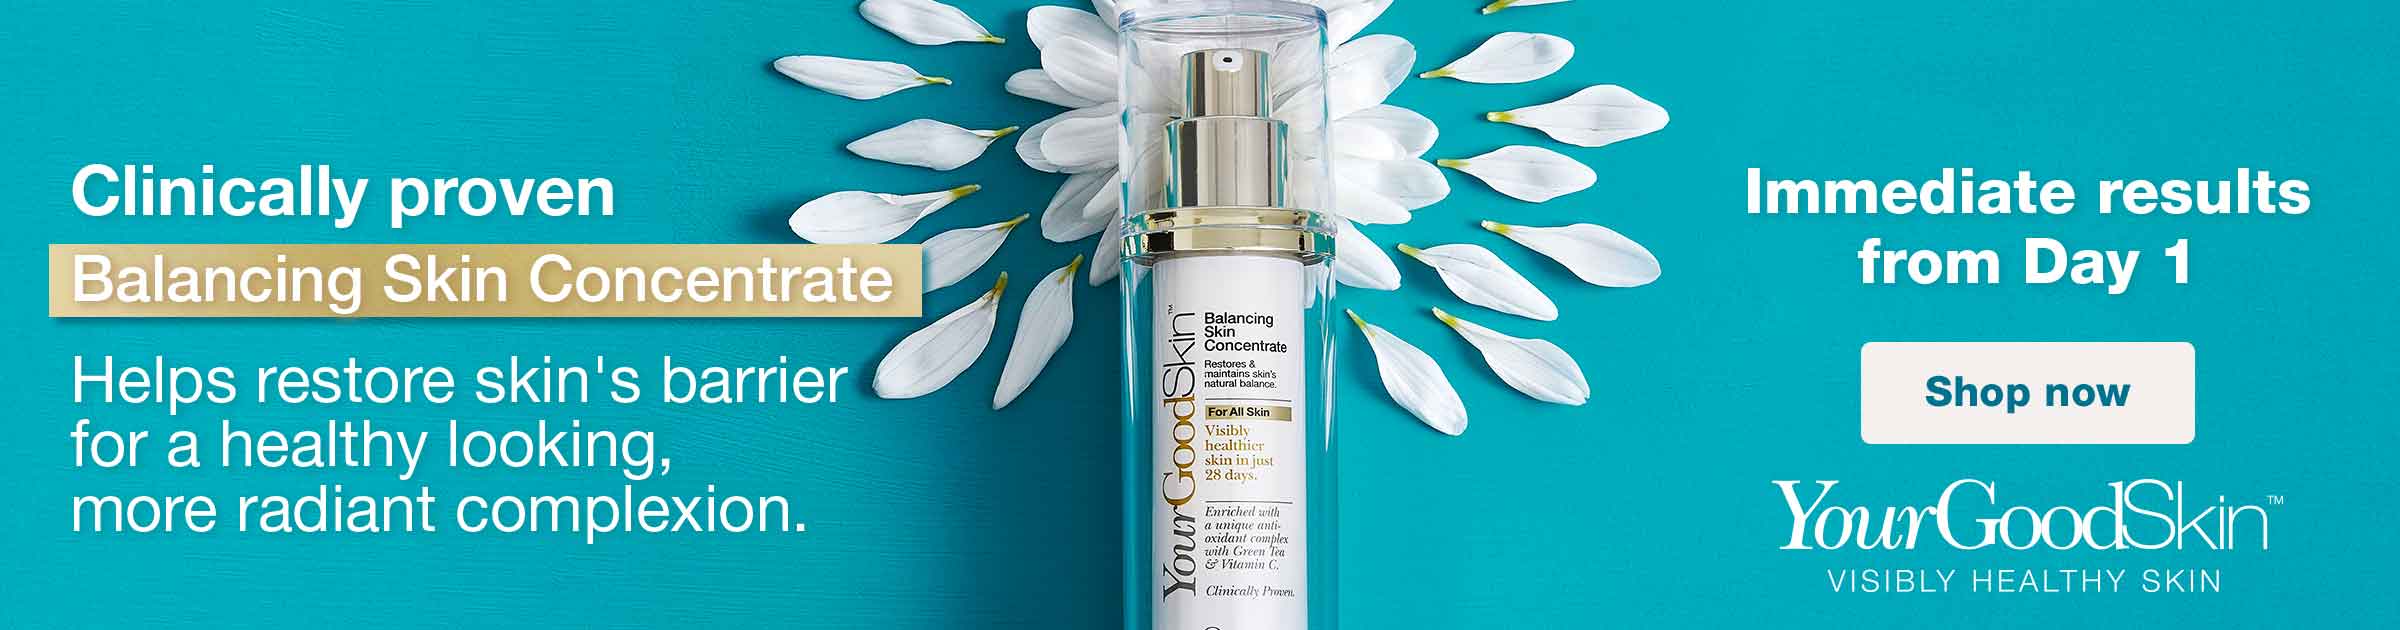 YourGoodSkin(TM). Visibly Healthy Skin. Clinically proven Balancing Skin Concentrate Helps restore skin's barrier for a healthy looking, more radiant complexion. Immediate results from Day 1. Shop Now.